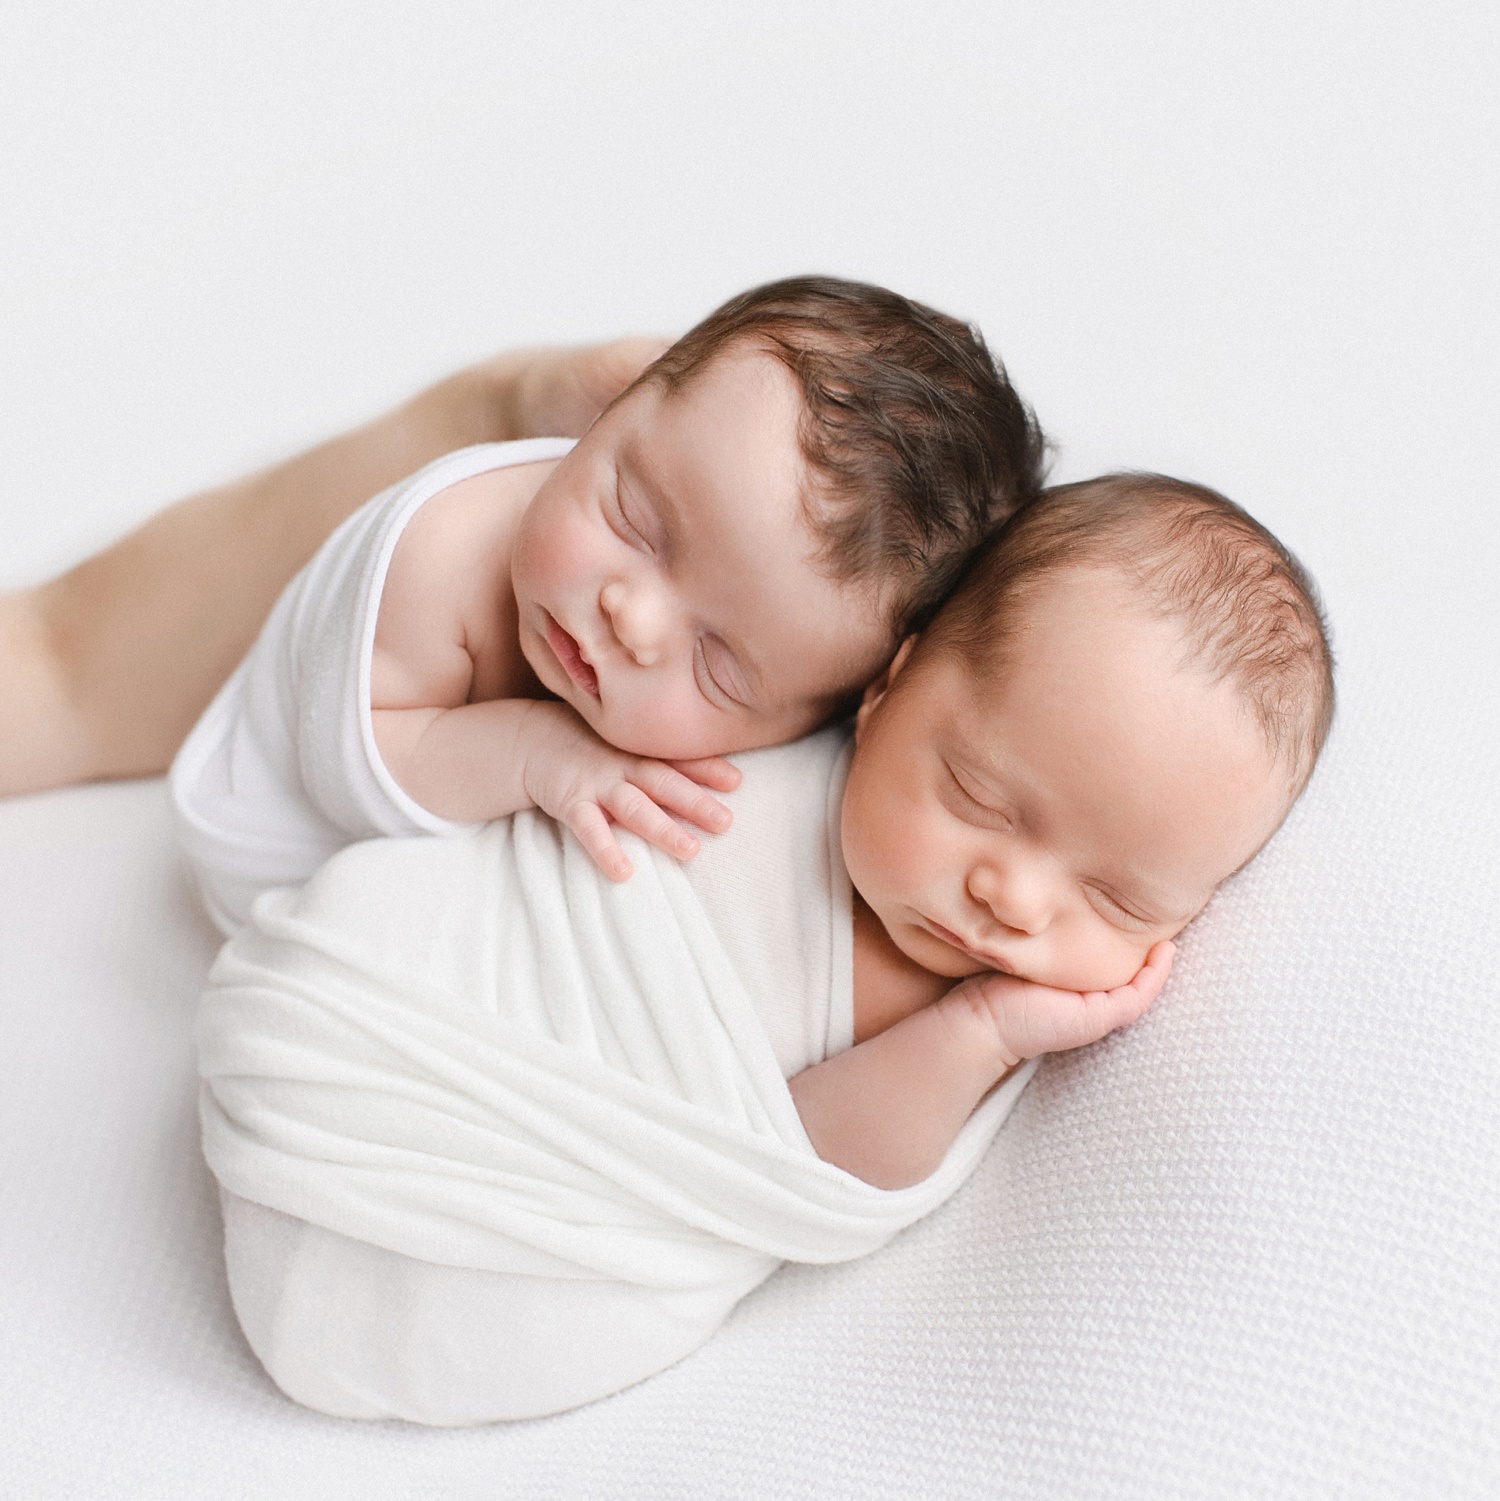 Newborn twins photographed at 3 weeks old.